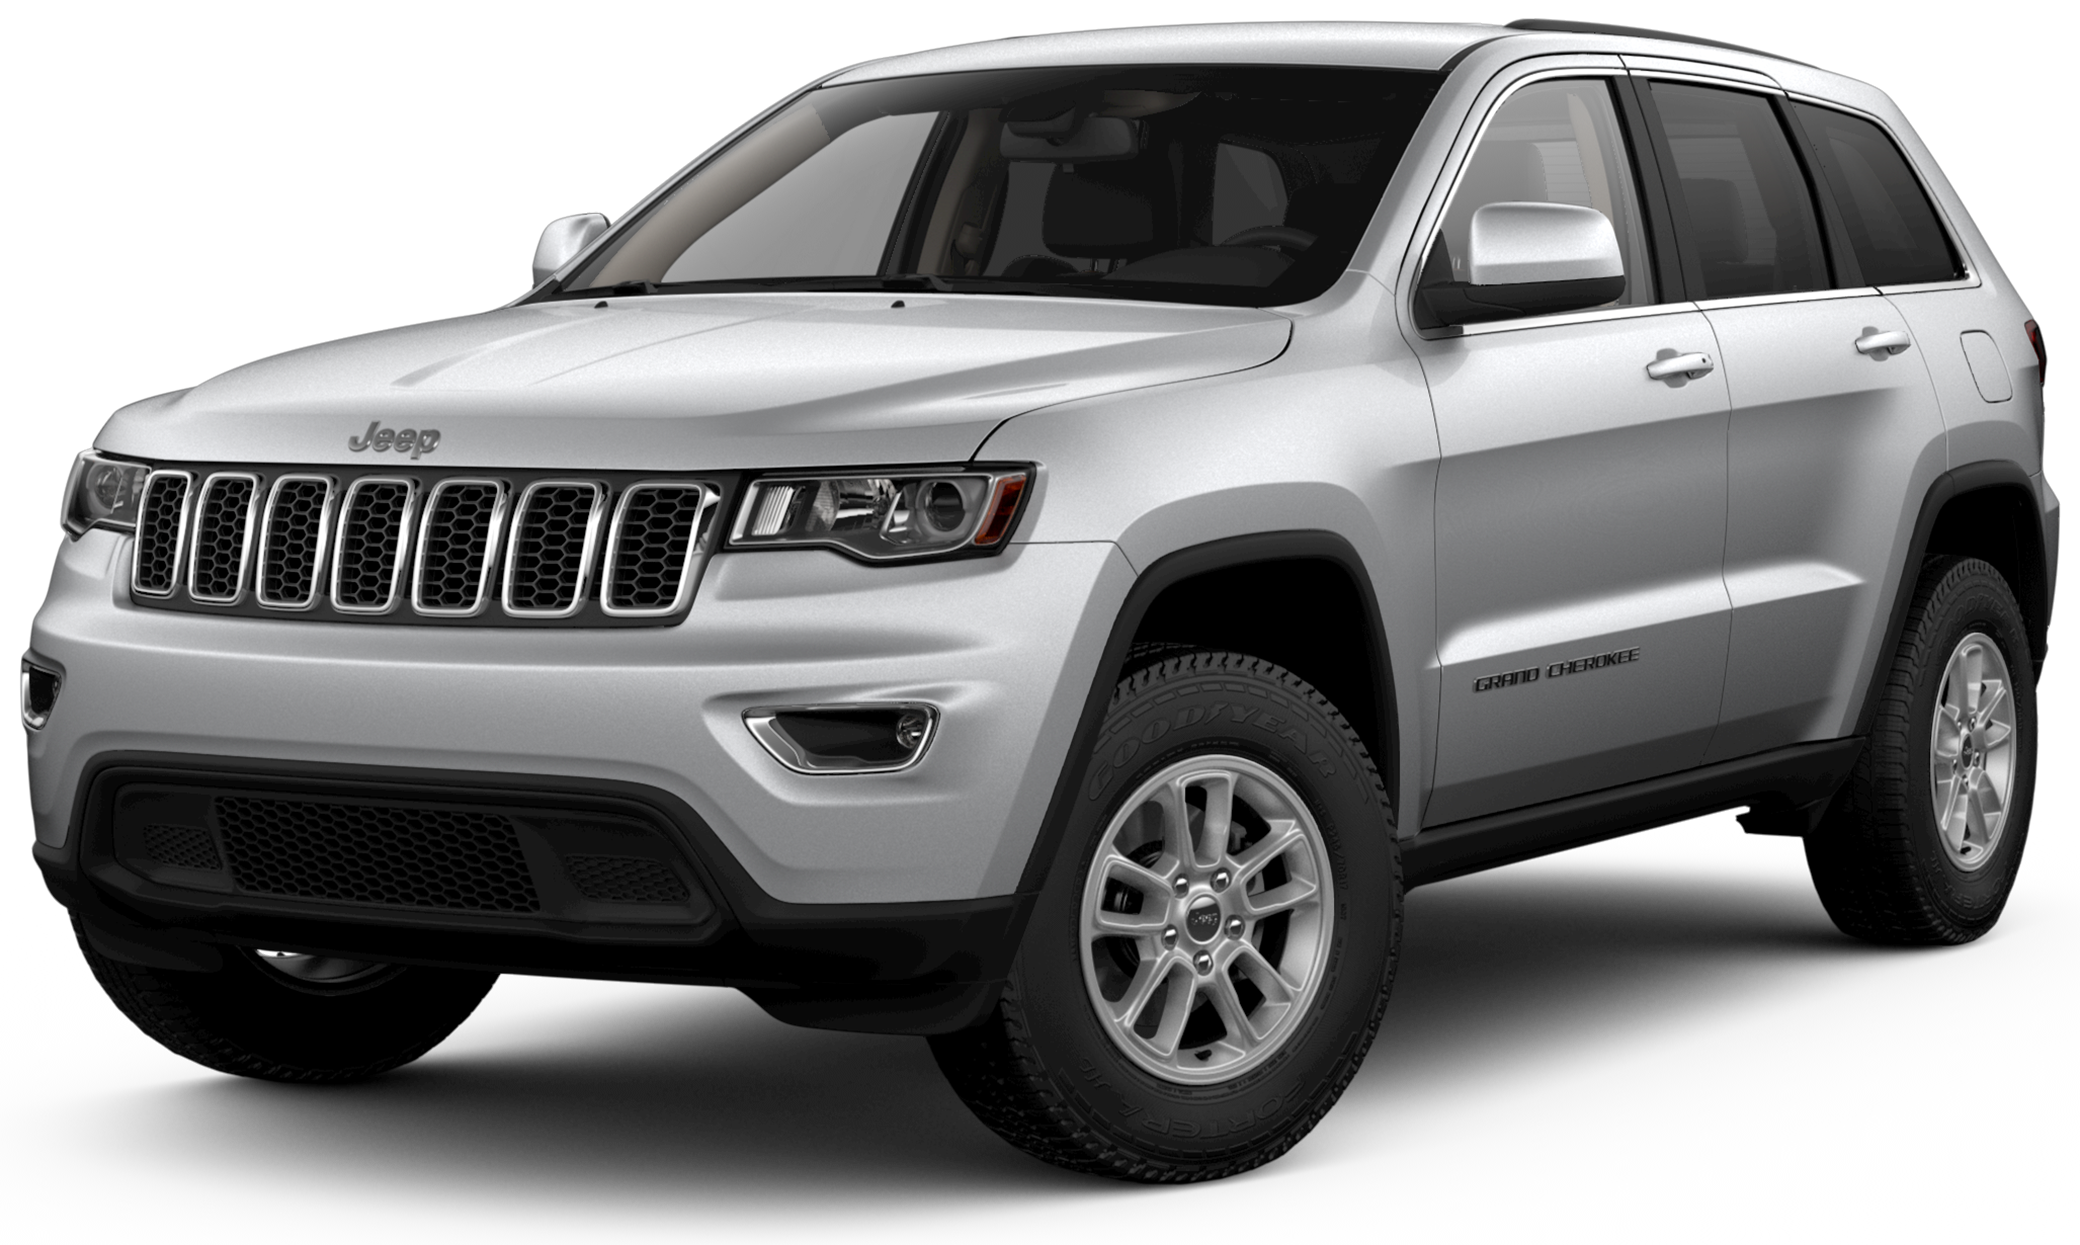 2021 Jeep Grand Cherokee Incentives, Specials & Offers in Ellwood City PA